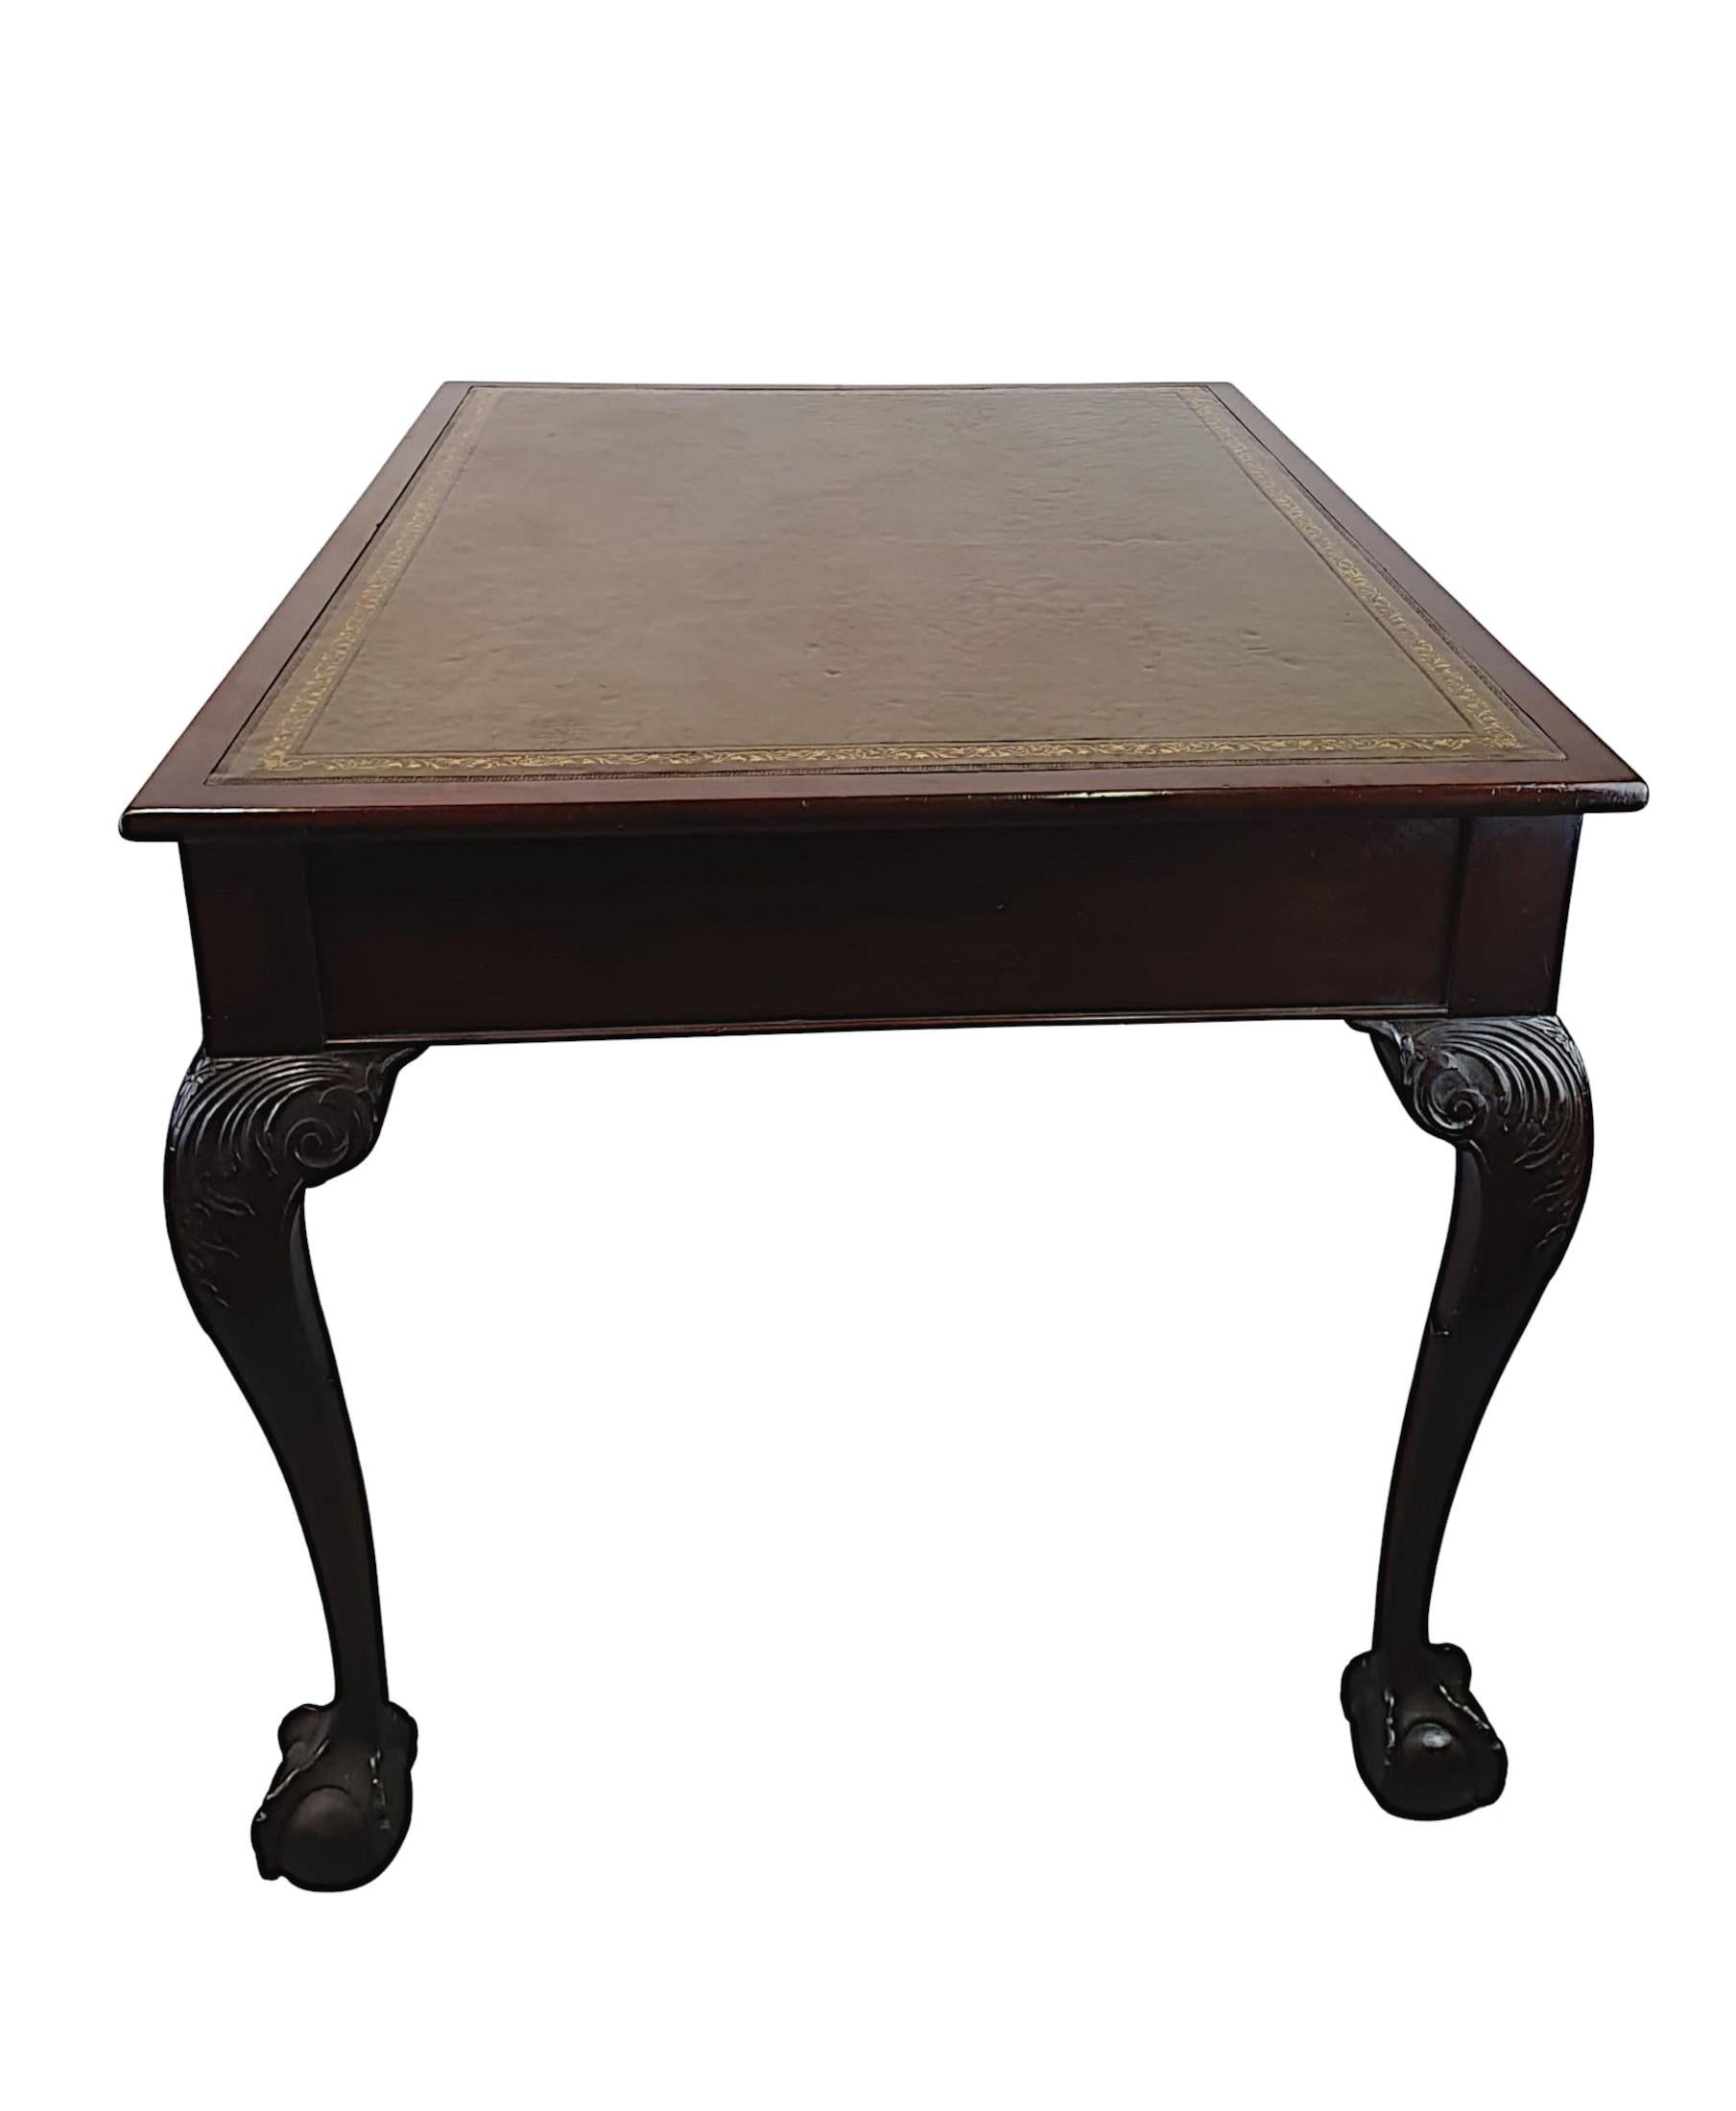 Stunning Late 19th Century Desk in the Thomas Chippendale Manner For Sale 1